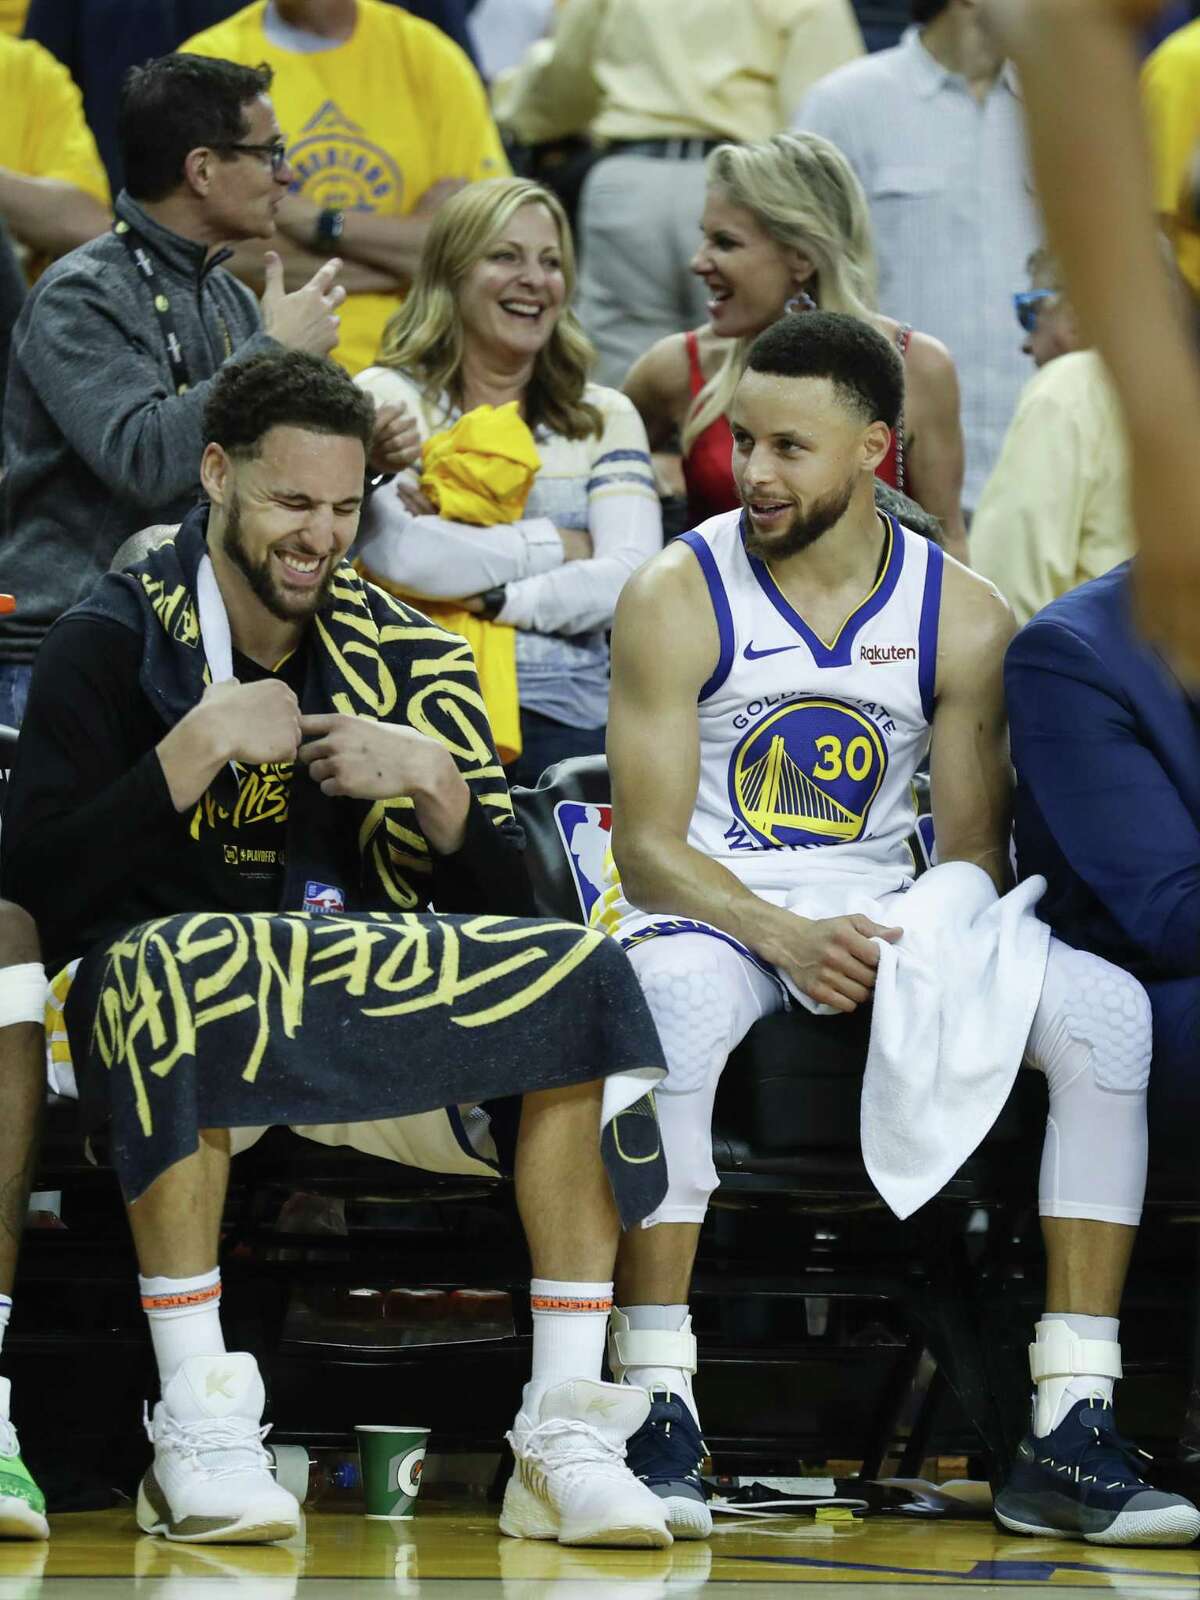 Golden State Warriors Klay Thompson and Stephen Curry are seen in the fourth quarter during game 1 of the Western Conference Finals between the Golden State Warriors and the Portland Trail Blazers at Oracle Arena on Tuesday, May 14, 2019 in Oakland, Calif. Thompson had an interesting take on whether or not Kevin Durant is considered a Splash Brother when he was asked about ahead of Game 6 of the NBA Finals. Curry just used the occasion to joke around. Click or swipe through to see some of the other greatest memories and moments the Warriors have made during their time in Oakland. >>>